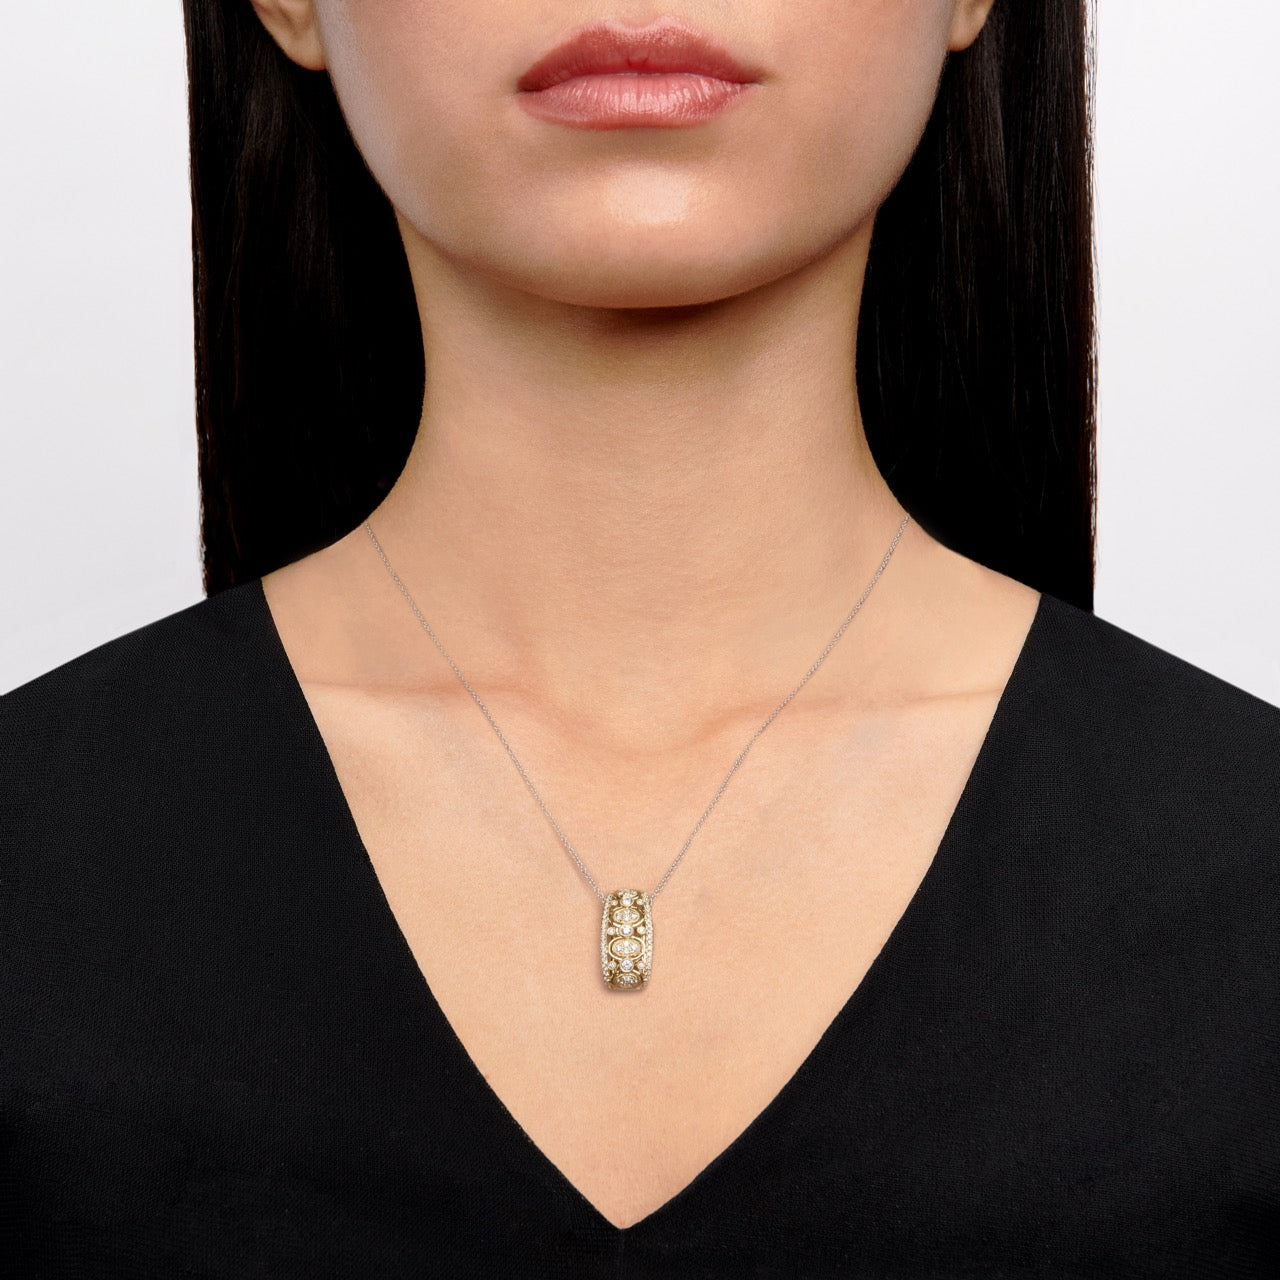 Pendant Necklace in 18k Gold with Diamonds LP4649